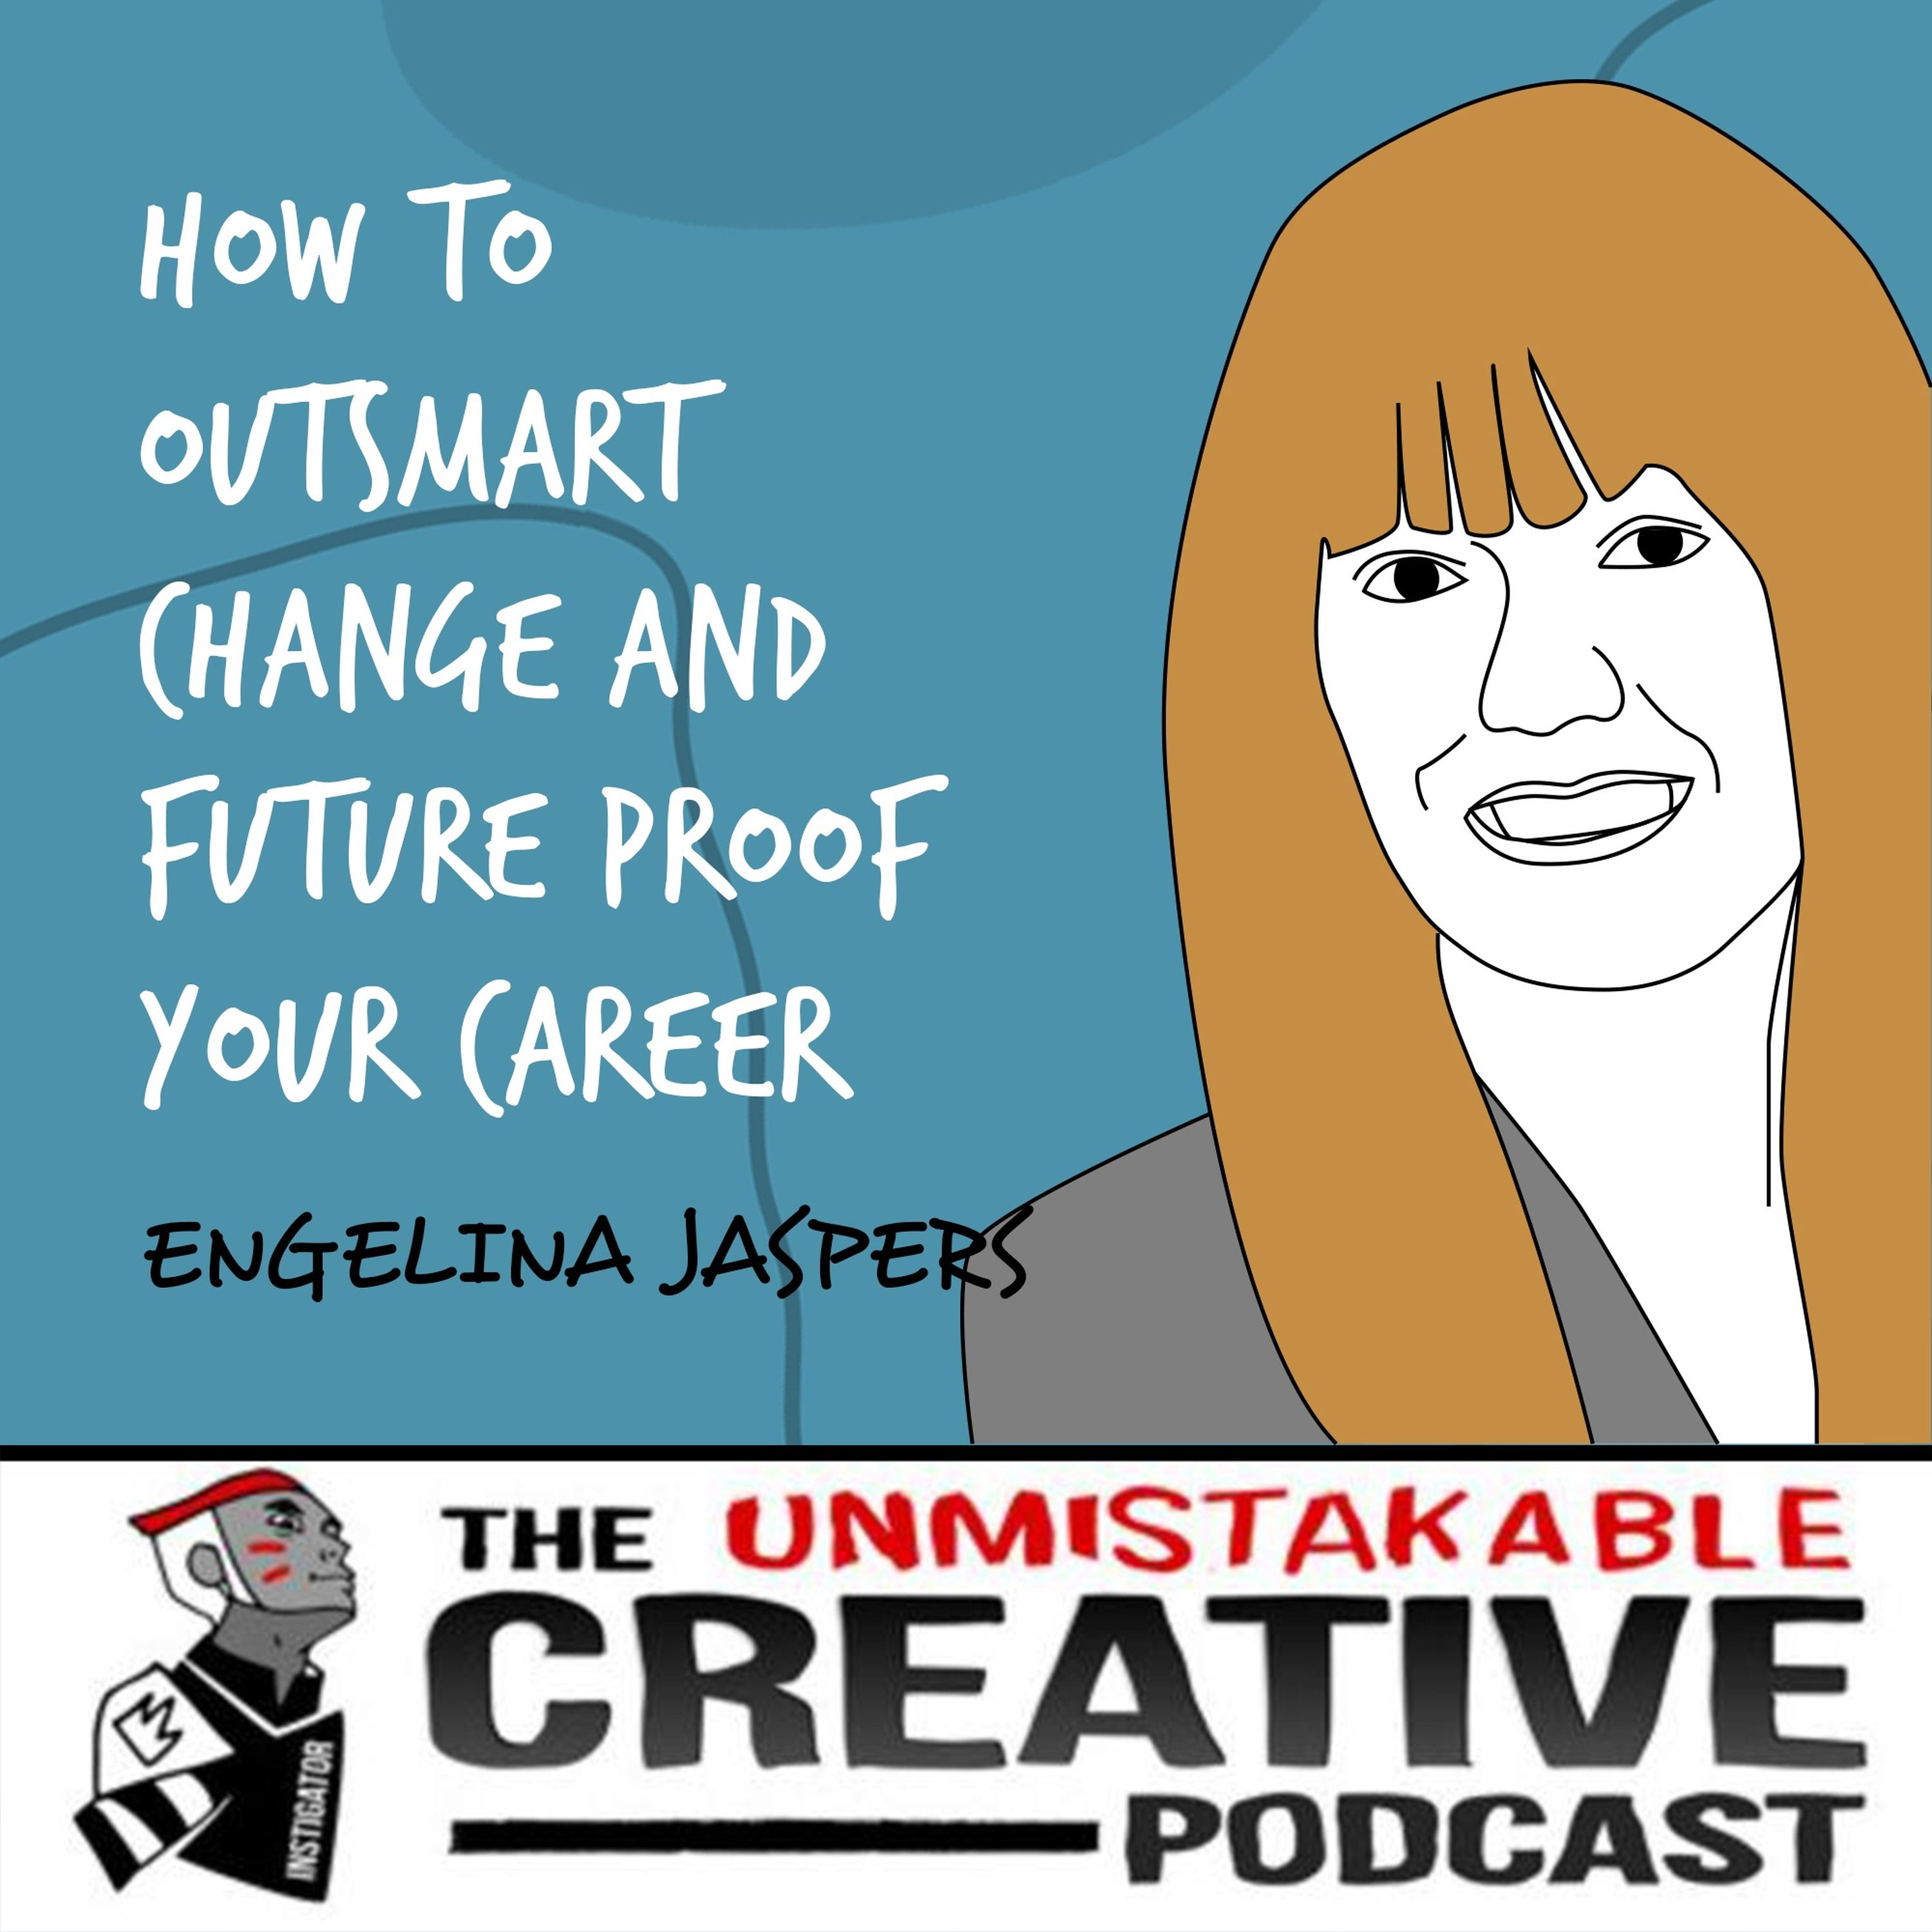 Engelina Jaspers | How to Outsmart Change and Future Proof Your Career Image